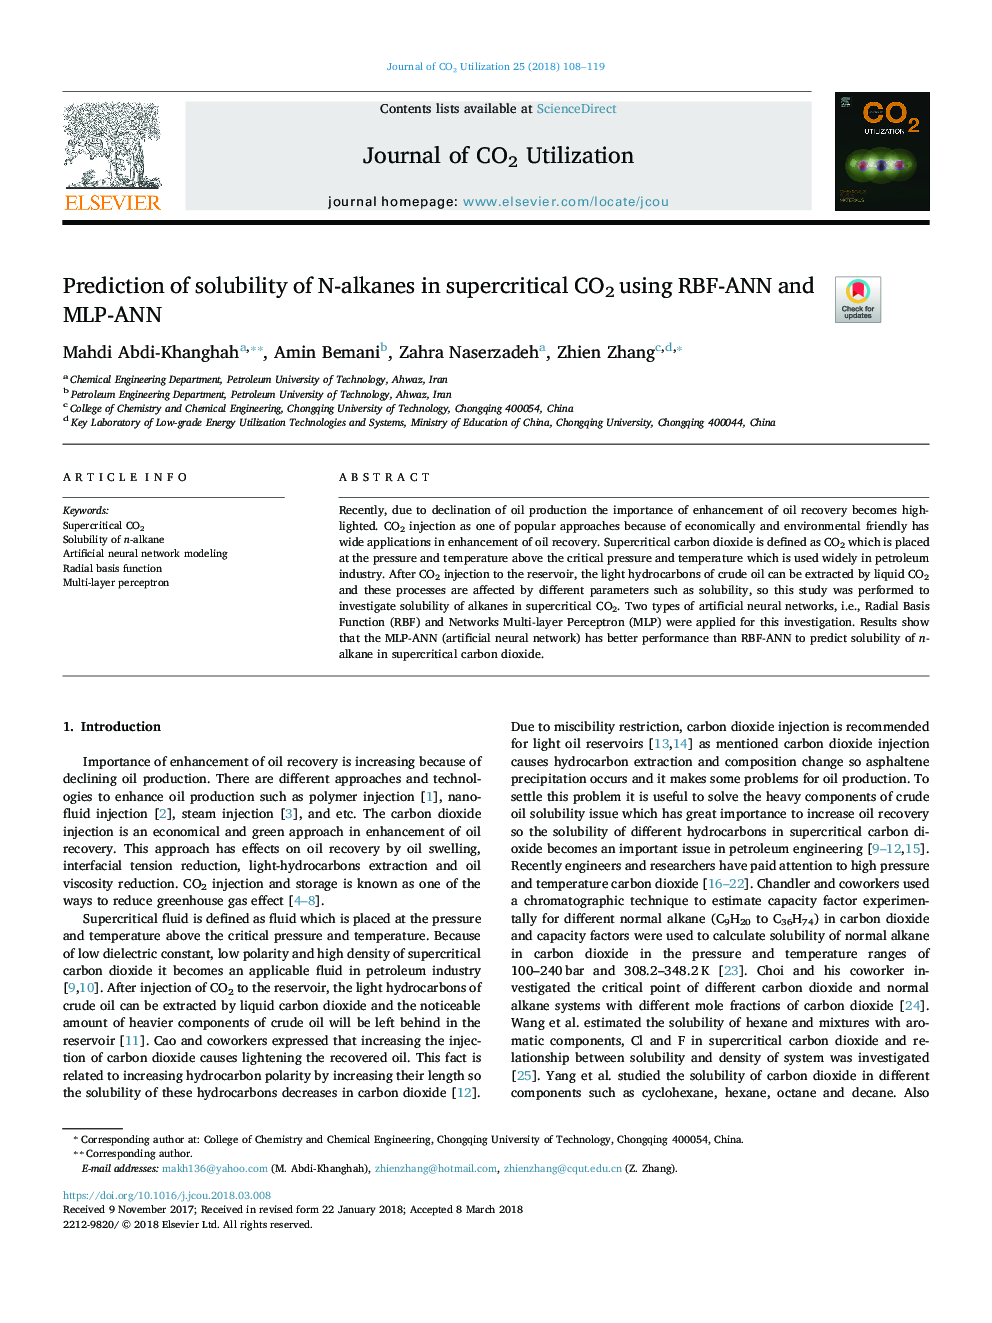 Prediction of solubility of N-alkanes in supercritical CO2 using RBF-ANN and MLP-ANN